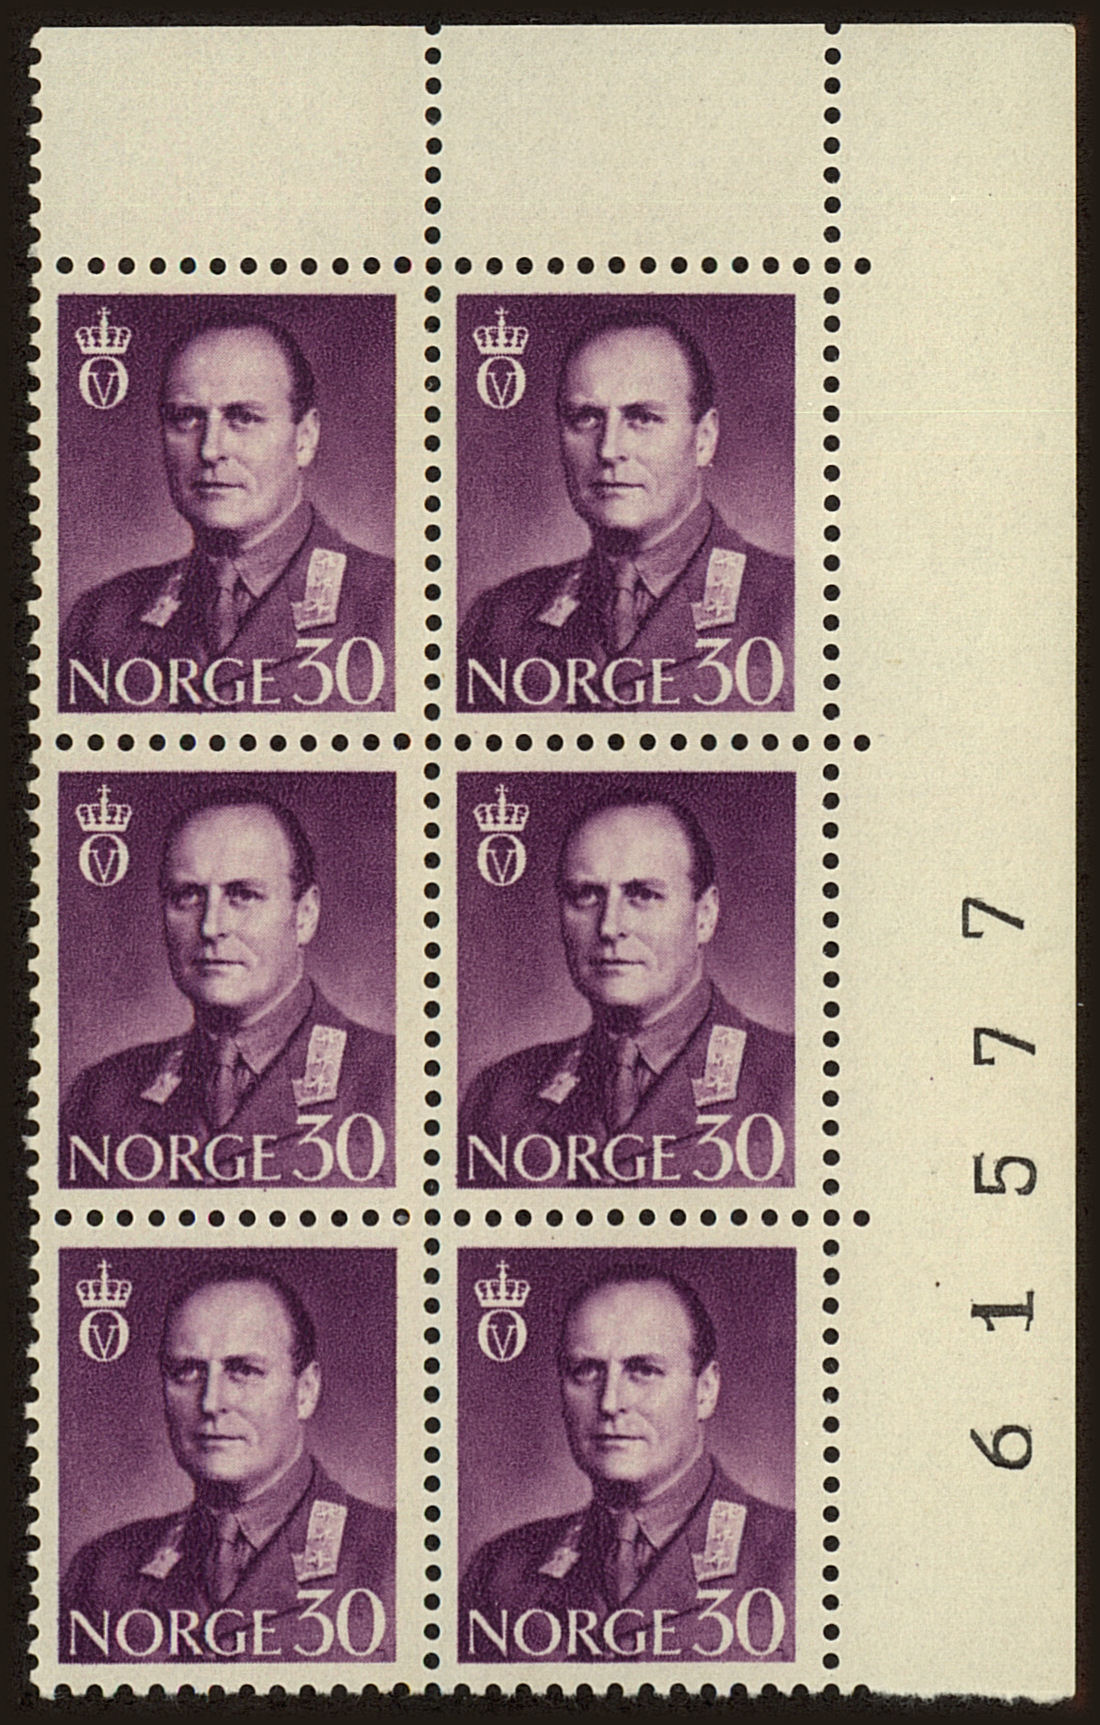 Front view of Norway 361 collectors stamp